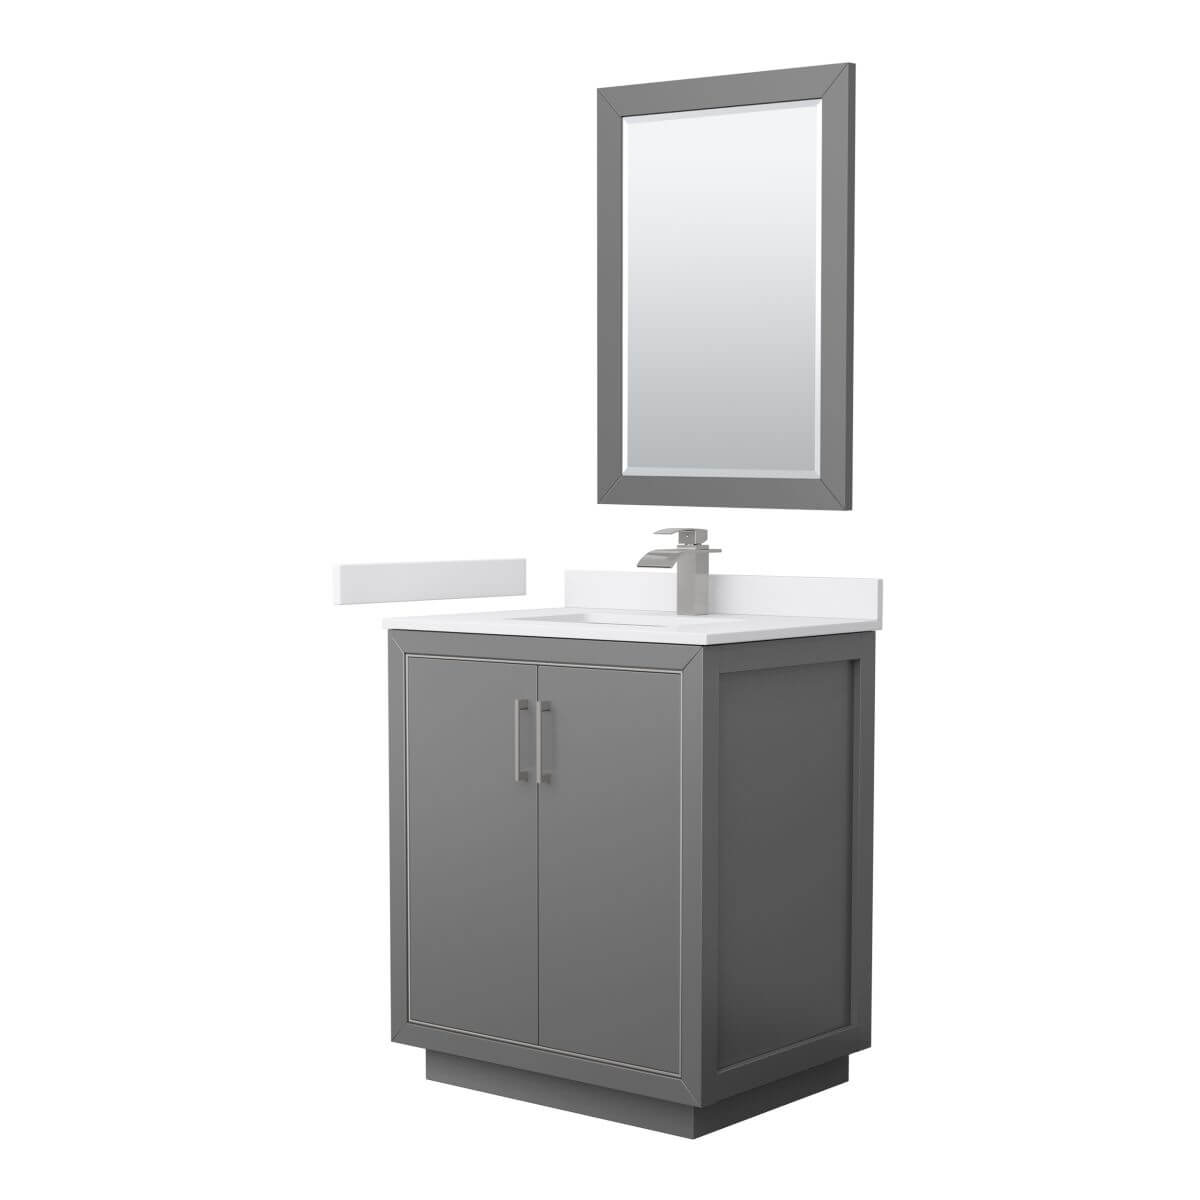 Wyndham Collection WCF111130SKGWCUNSM24 Icon 30 inch Single Bathroom Vanity in Dark Gray with White Cultured Marble Countertop, Undermount Square Sink, Brushed Nickel Trim and 24 Inch Mirror